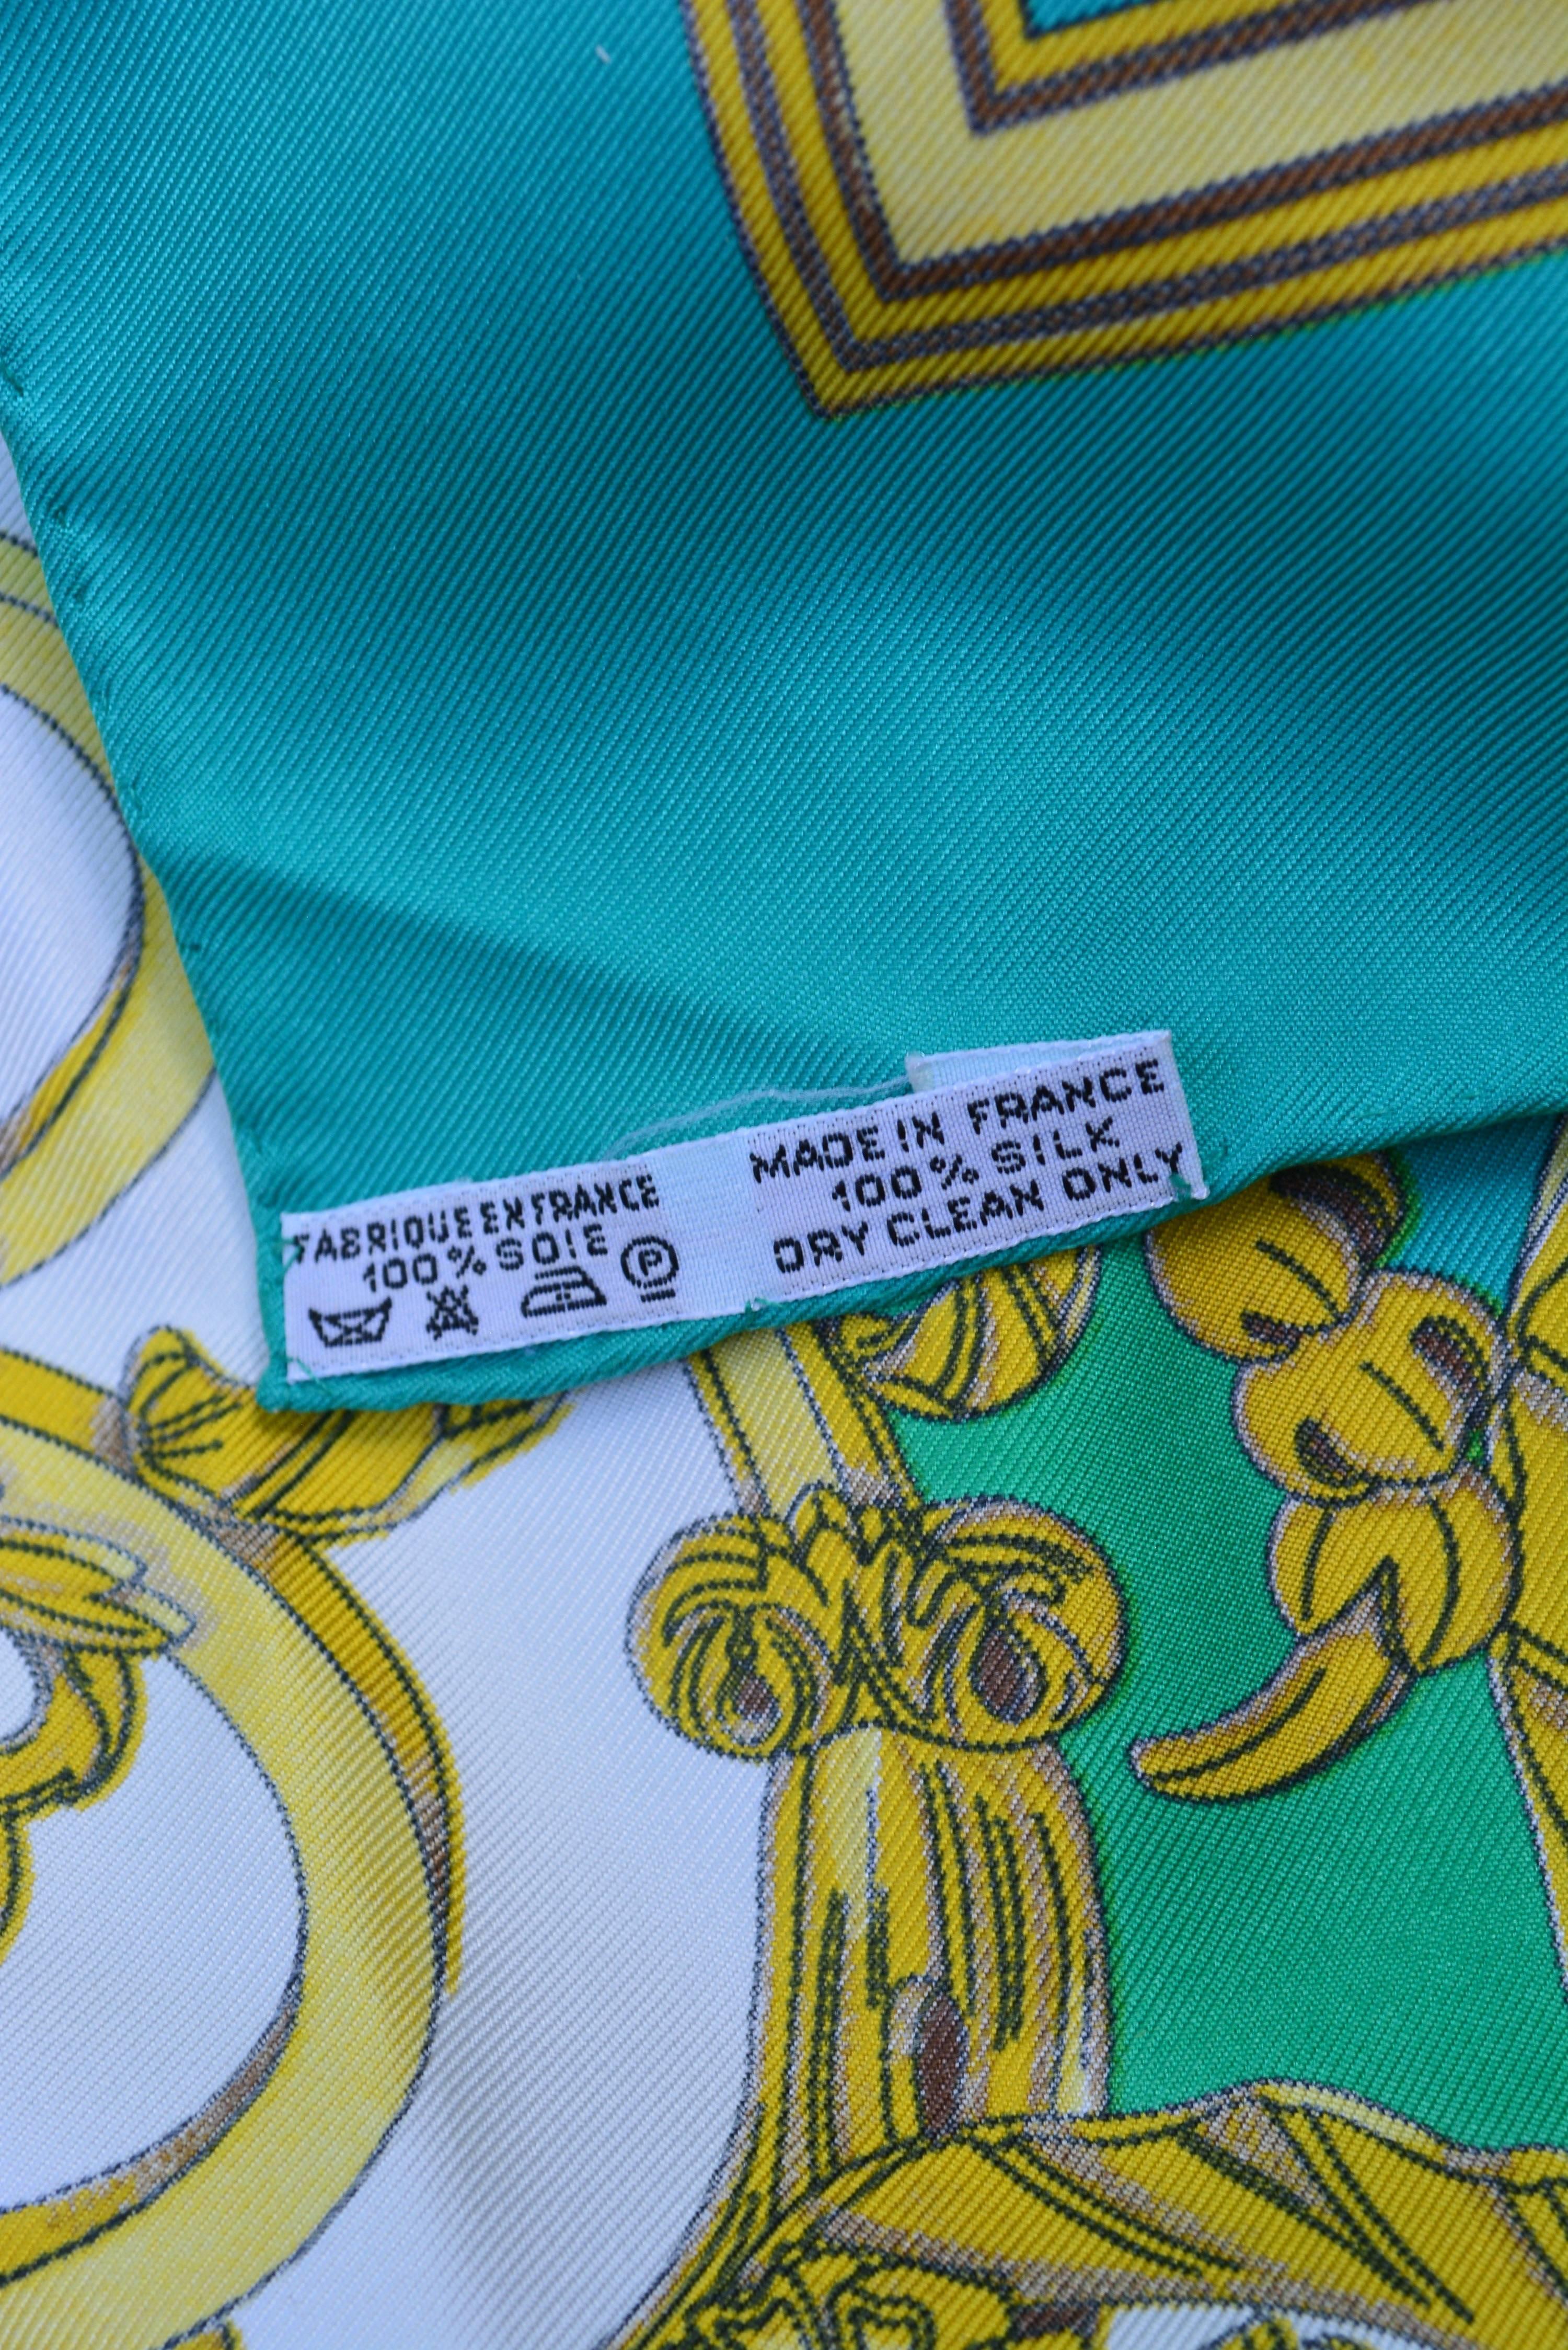 Hermes Paris Les Tuileries turquoise silk scarf with care tag. Hallmarked J Metz with another Hermes hallmark across form it. Great color and condition.  35